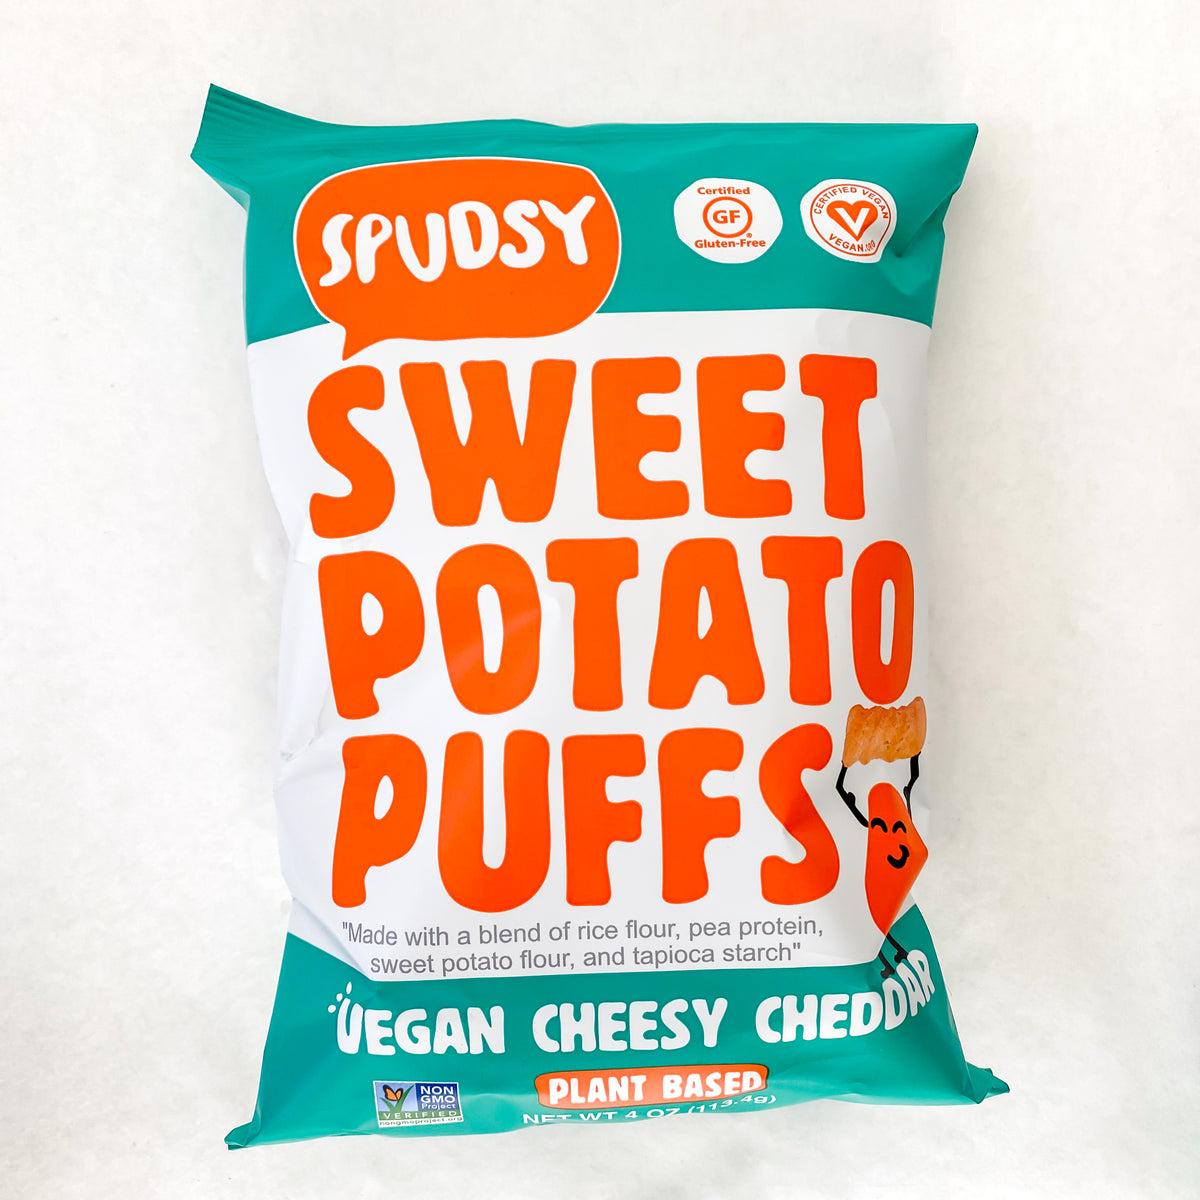 Spudsy Sweet Potato Puff Cheddar